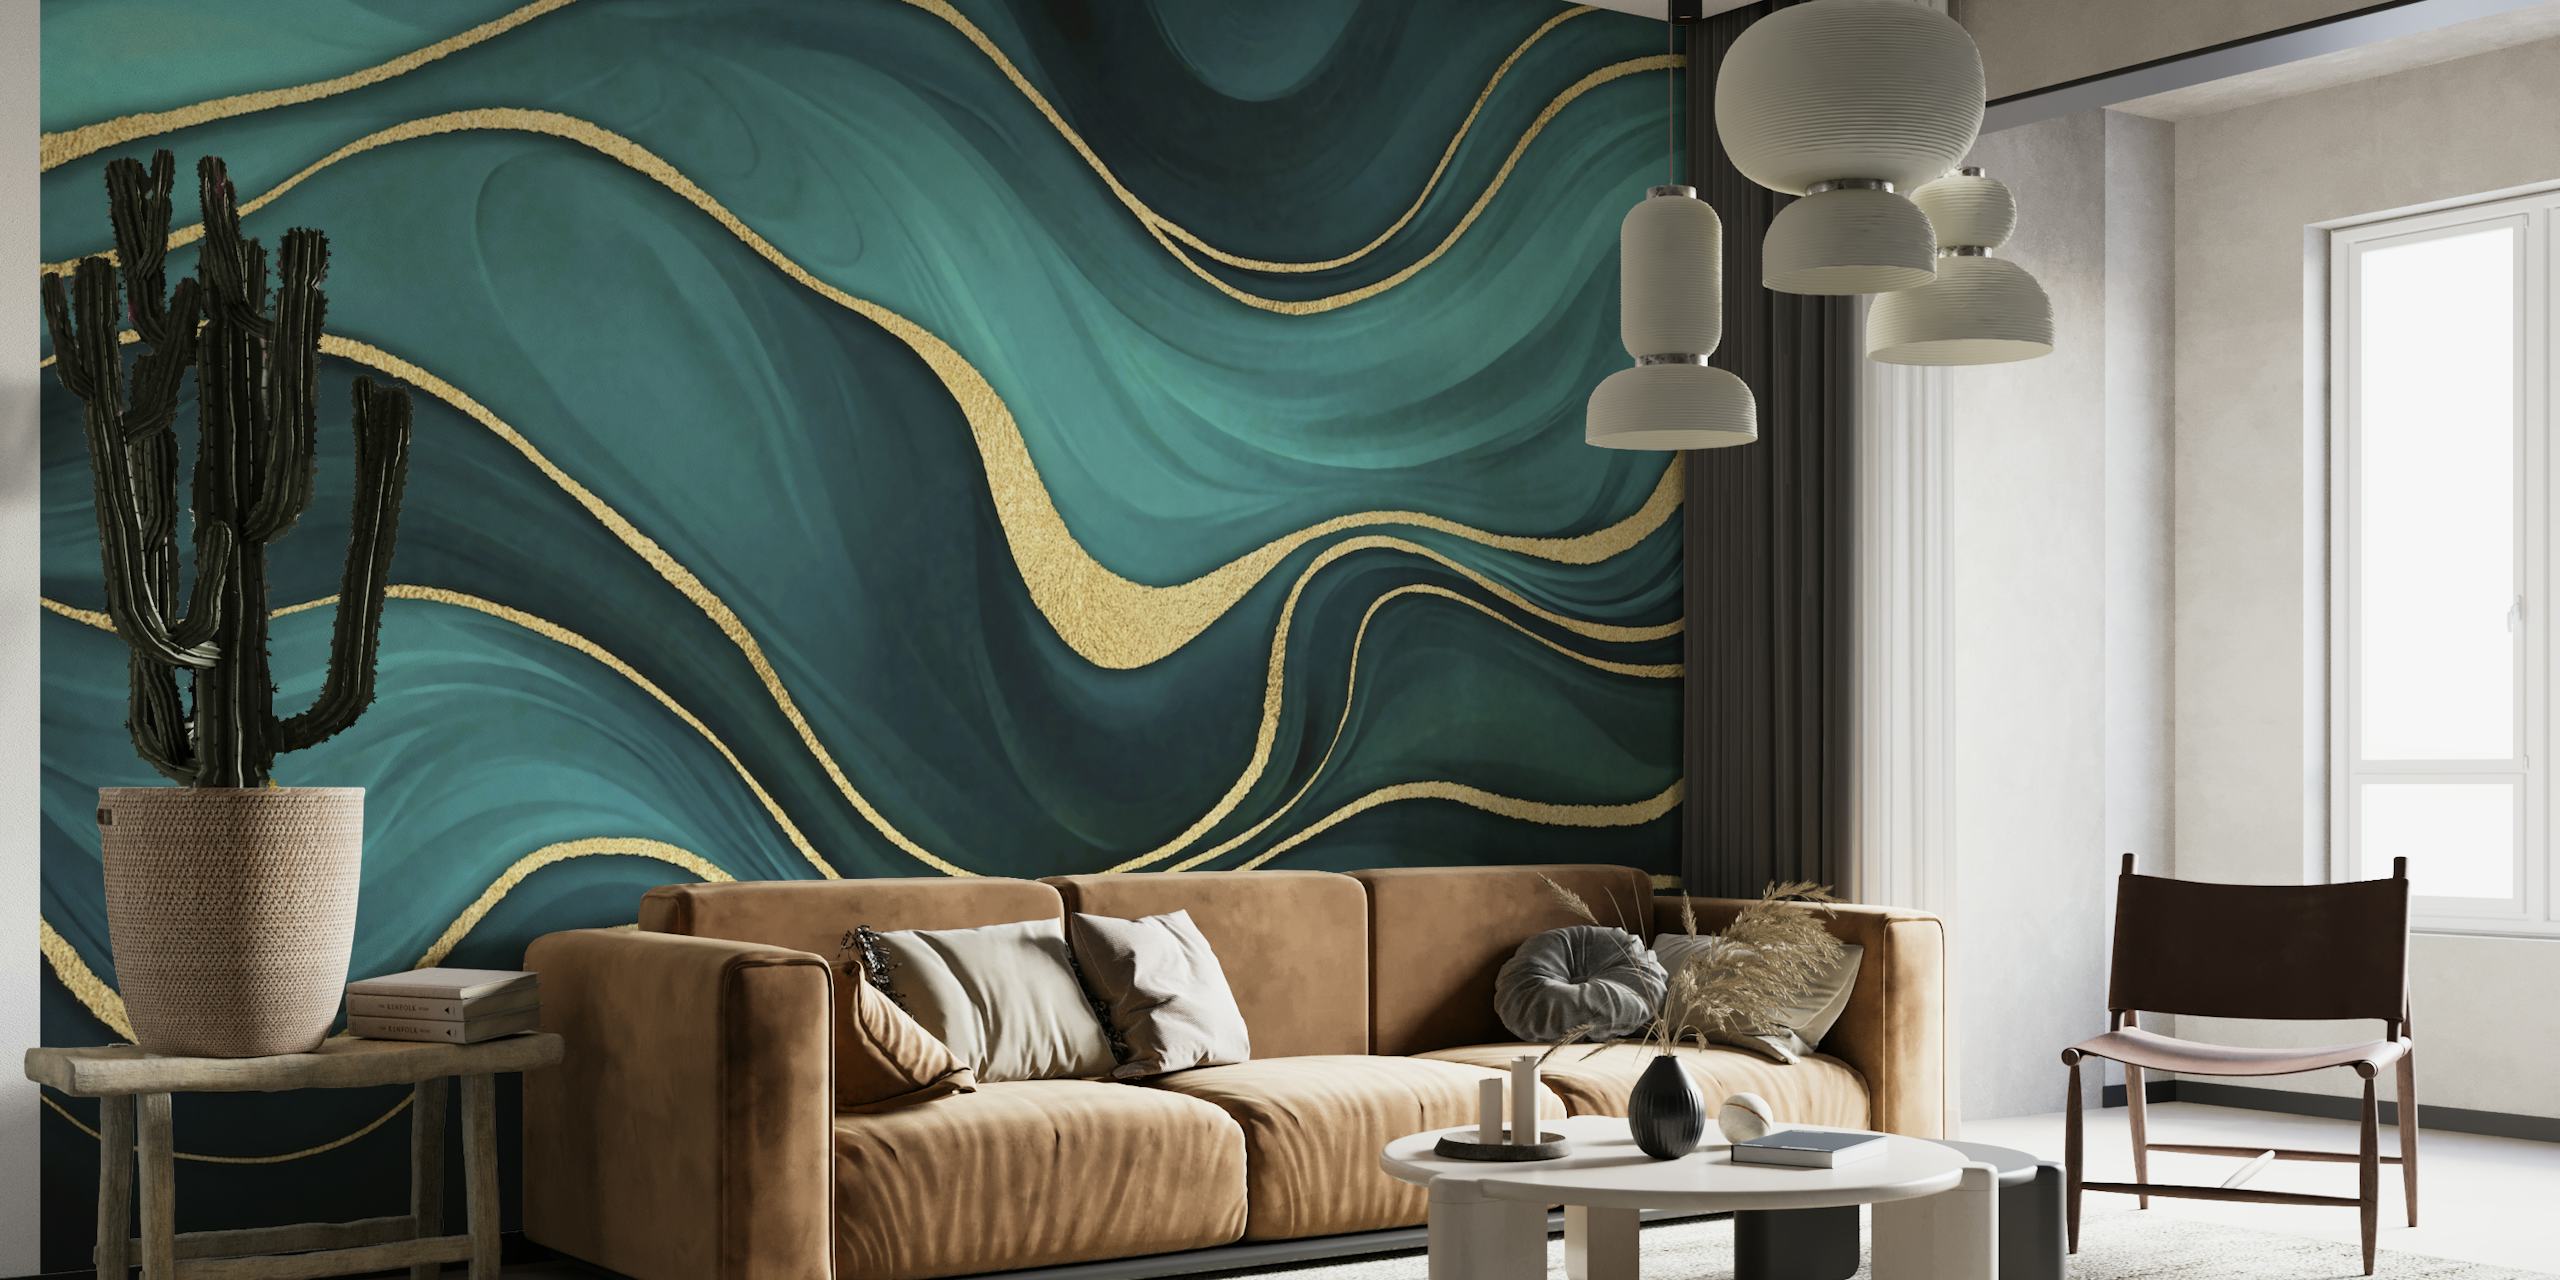 Luxury Marble Teal Turquoise With Gold wallpaper